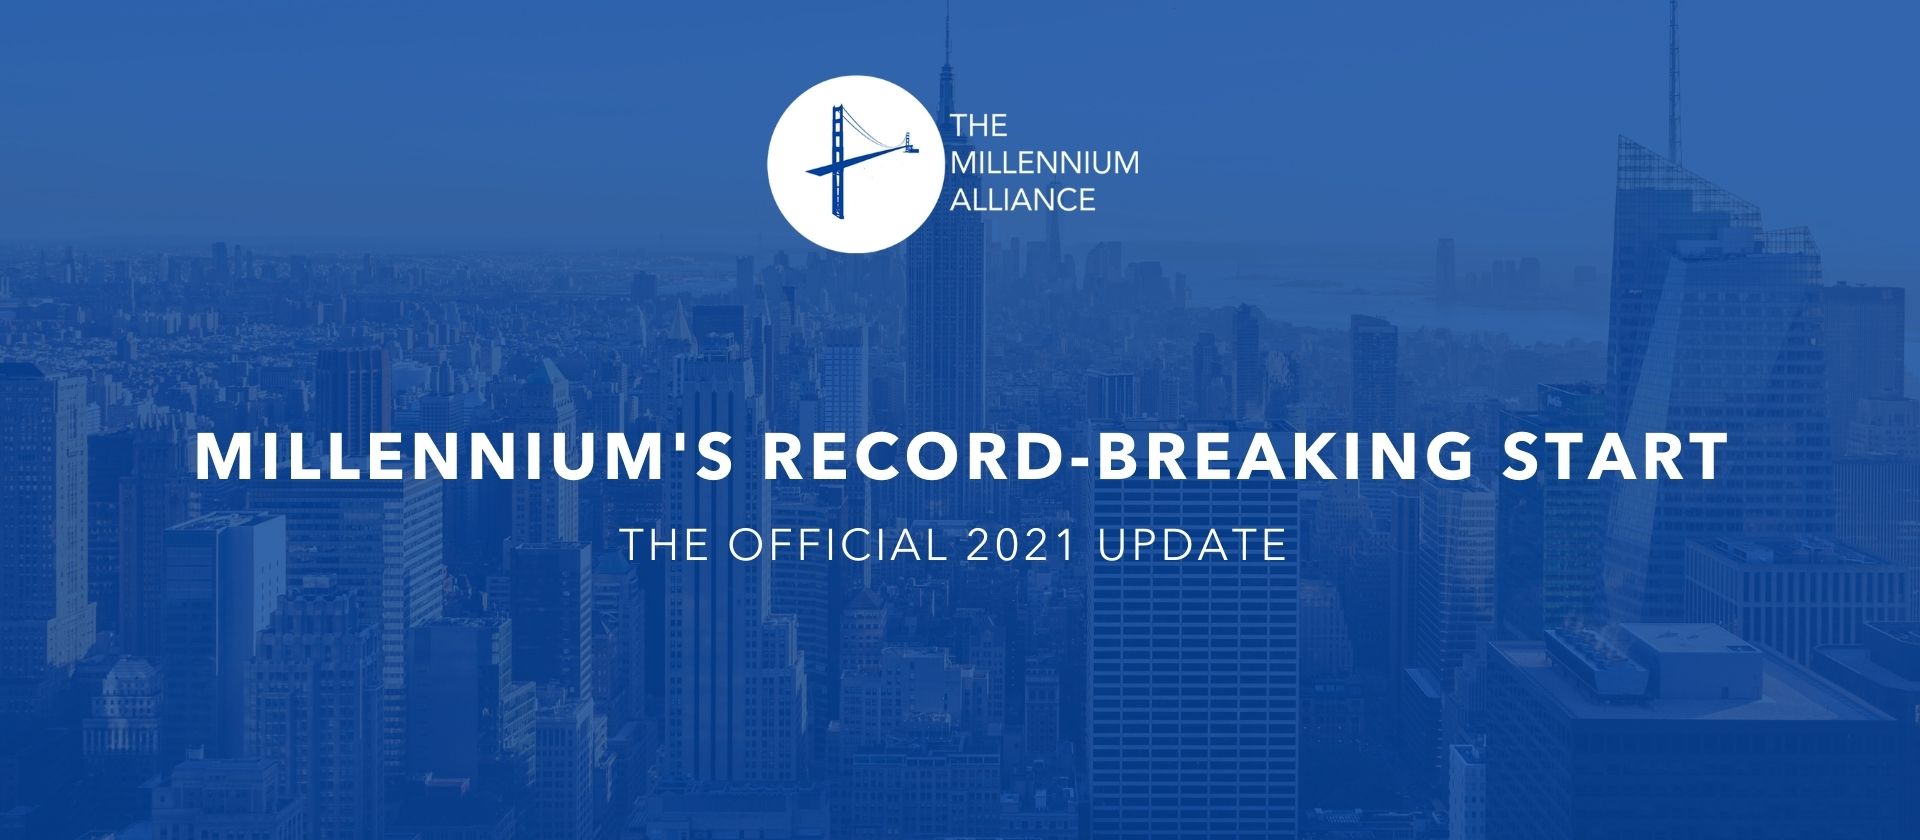 The Millennium Alliance Comes Out Of The Gate At A Record-Breaking Pace in 2021